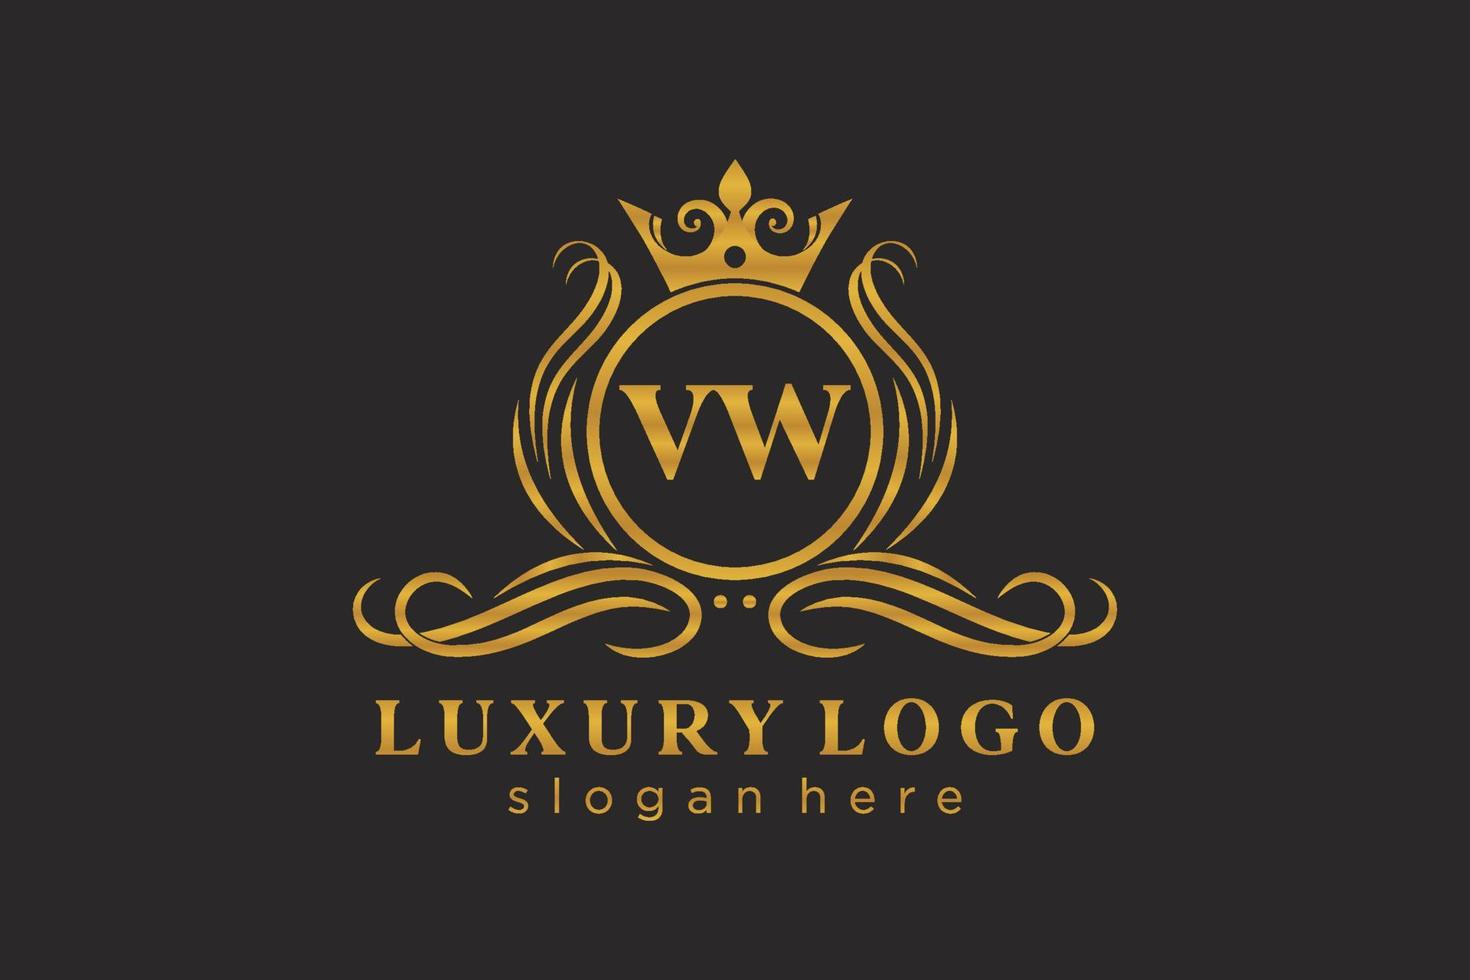 Initial VW Letter Royal Luxury Logo template in vector art for Restaurant, Royalty, Boutique, Cafe, Hotel, Heraldic, Jewelry, Fashion and other vector illustration.